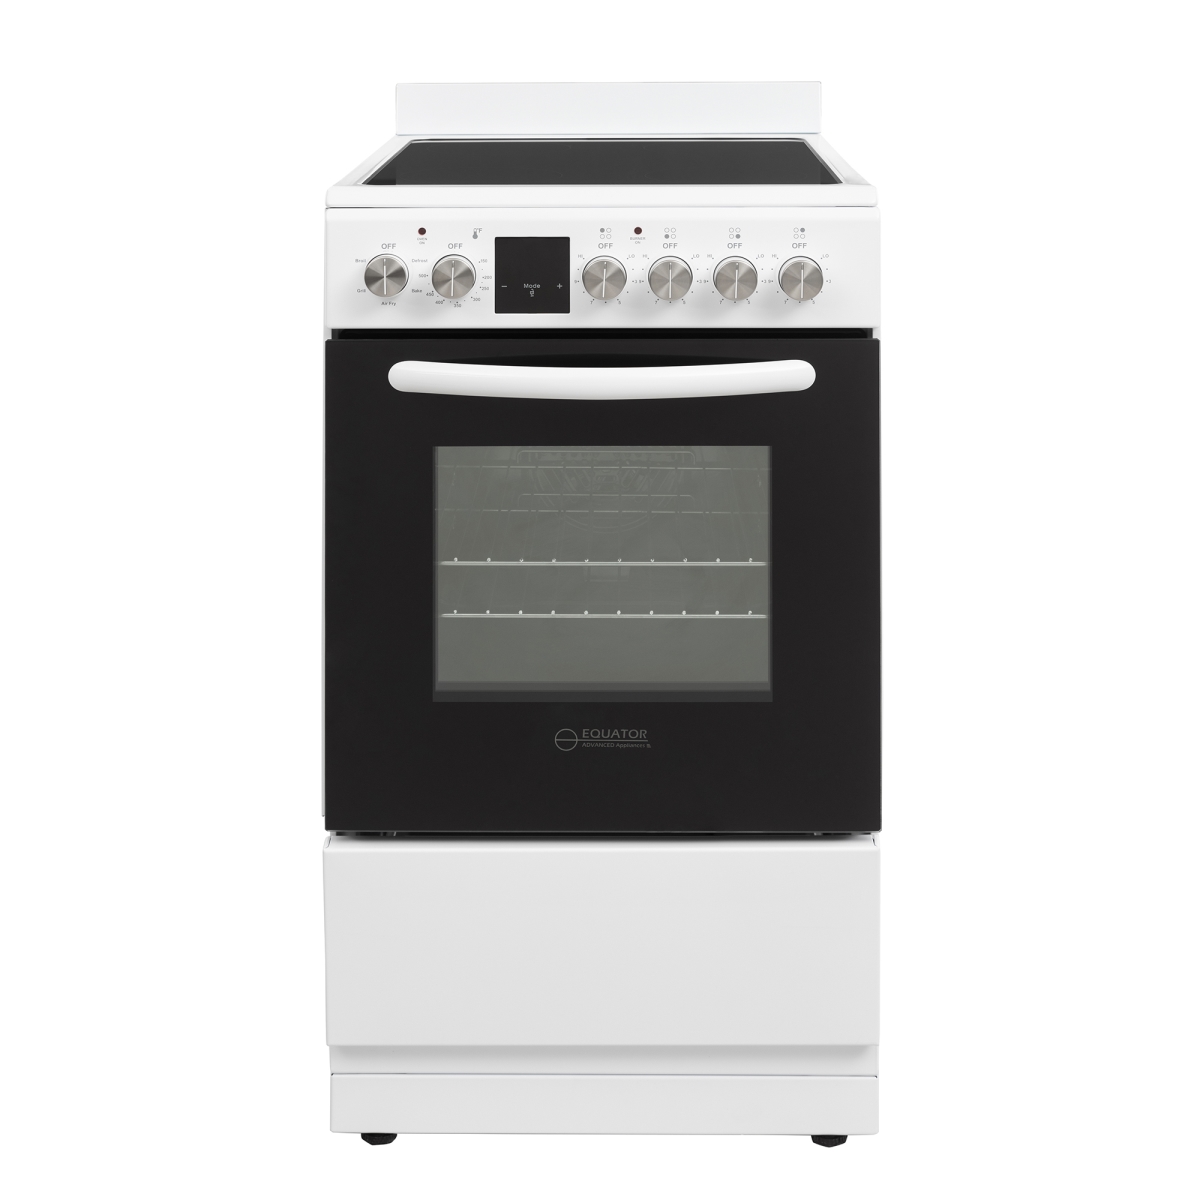 Picture of Equator Advanced Appliances ECR 204 White Equator 20 Freestanding 4 Burner Electric Cooking Range+Convection Oven White